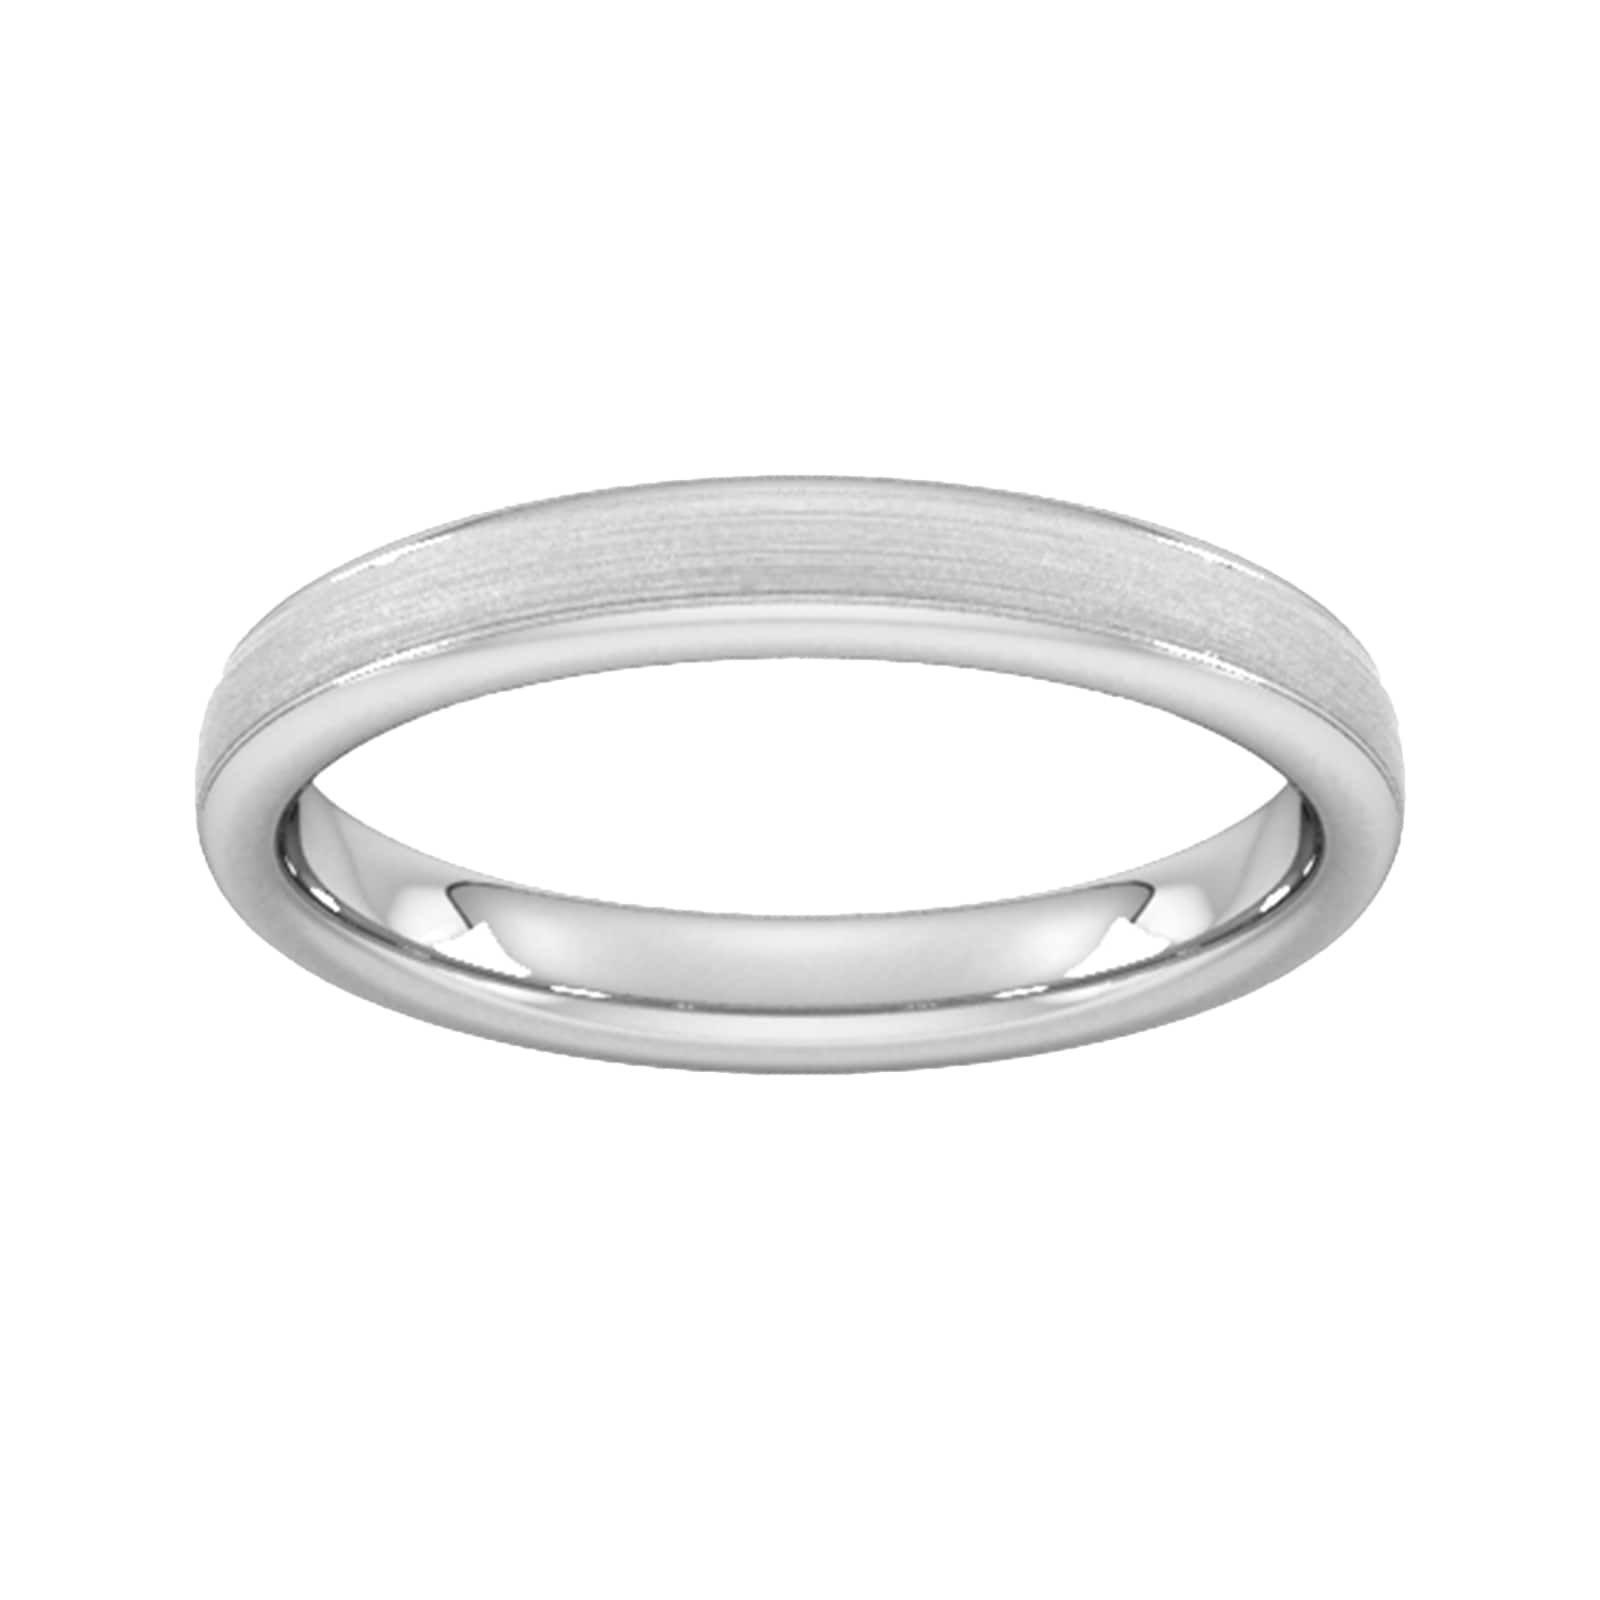 3mm slight court extra heavy matt centre with grooves wedding ring in 9 carat white gold - ring size i